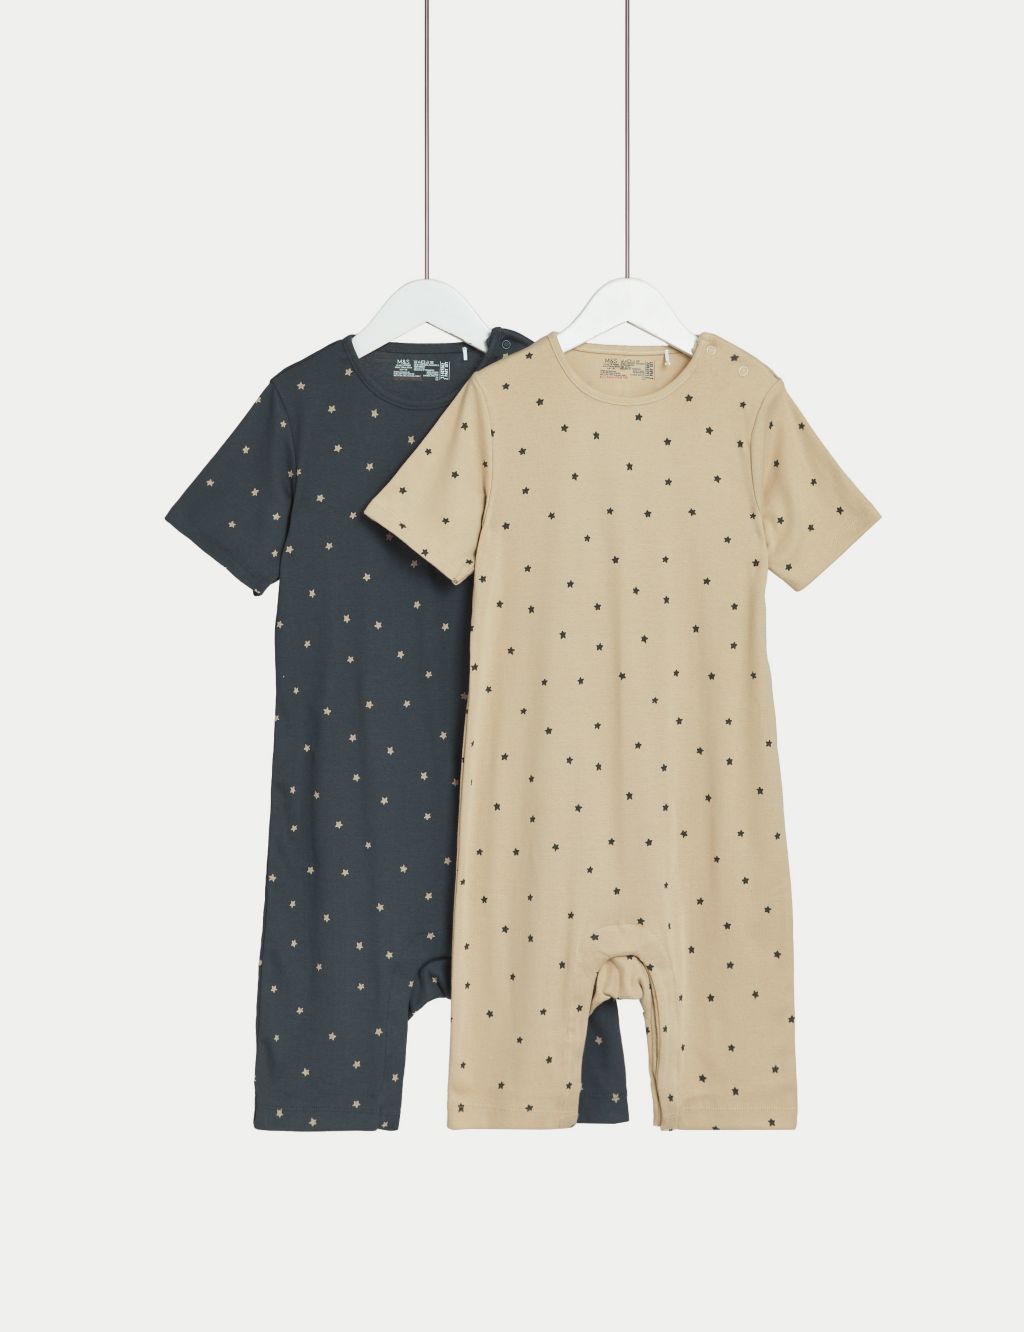 Babies' Romper Outfits